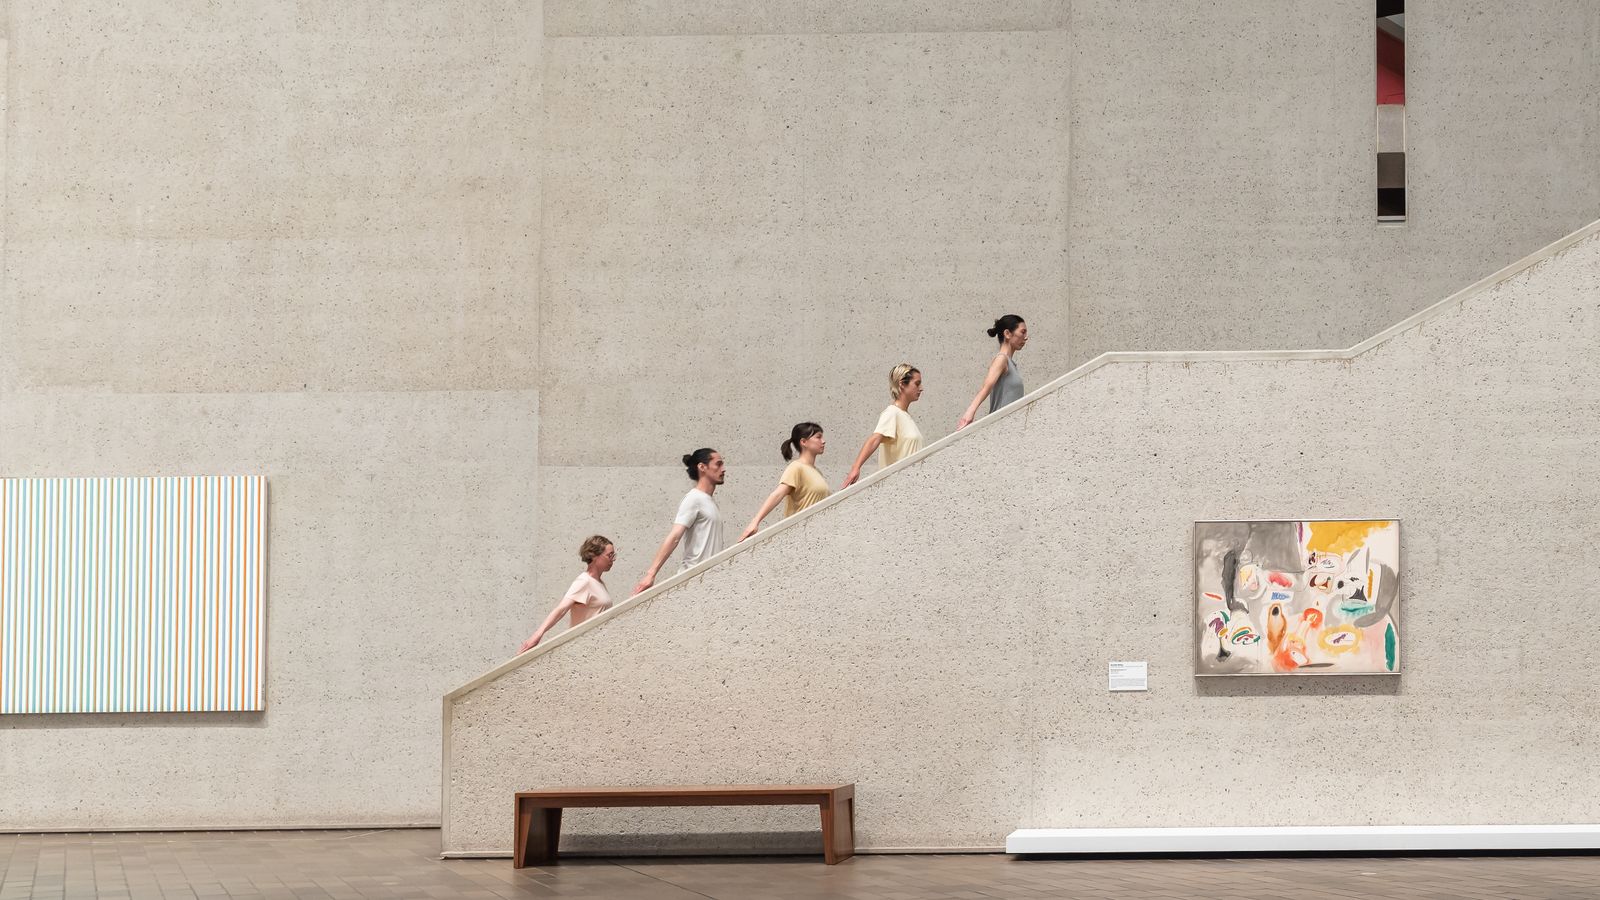 A group of dancers walked up stairs in the brutalist National Gallery architecture.